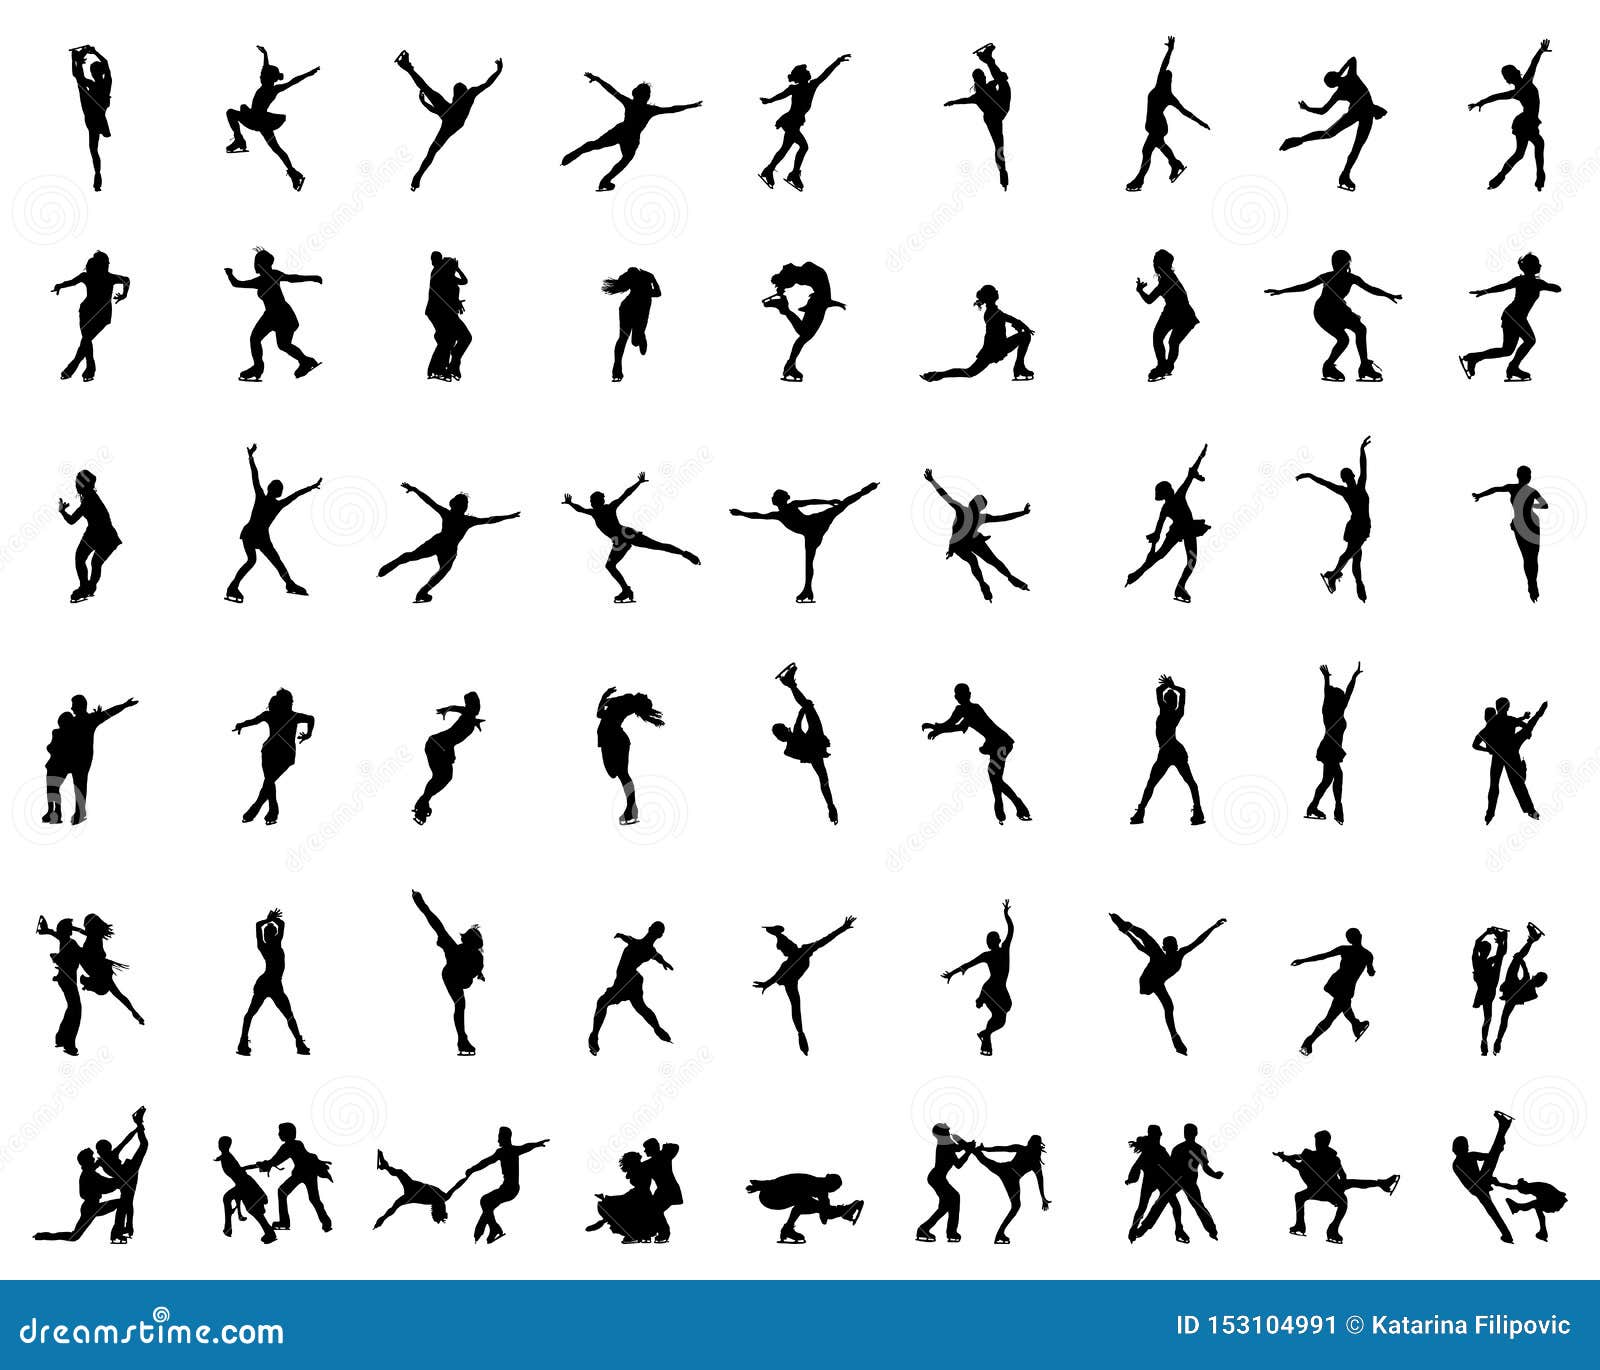 silhouettes of figure skaters